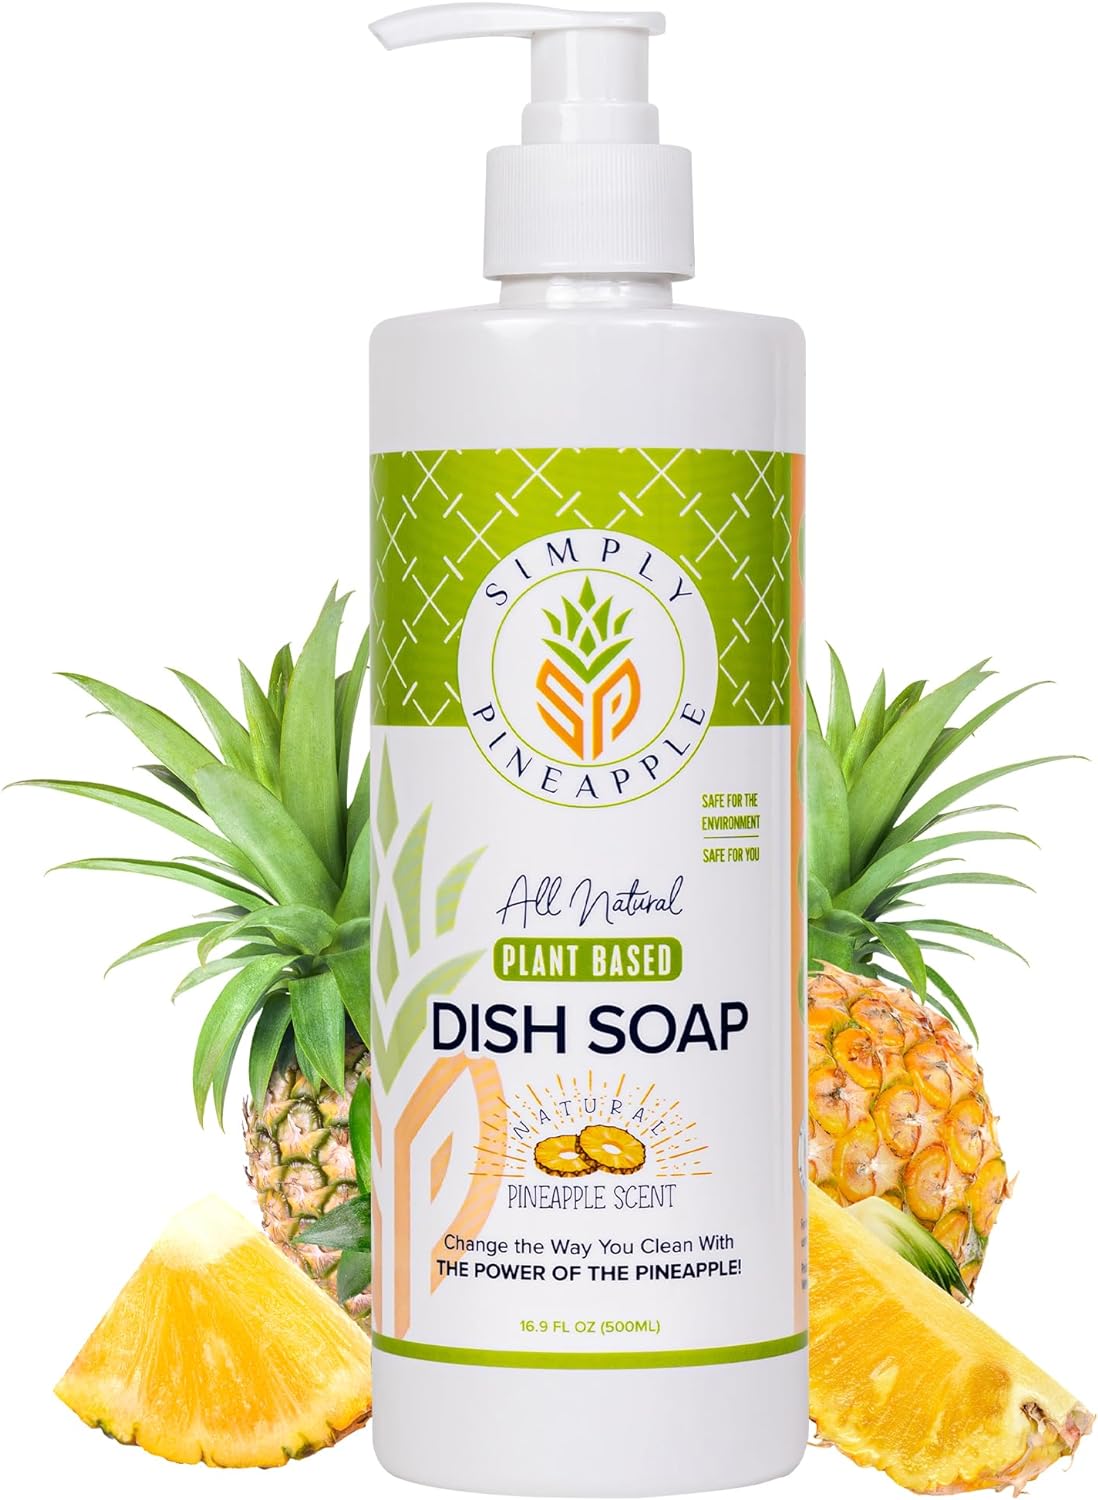 Plant-Based Pineapple Enzyme & Soapberry Dish Soap Liquid- Pineapple Scent, Pack of 1 (16.9 fl oz each) | Gentle on Skin, Tough on Grease | Eczema-Friendly | No Artificial Fragrances or Colors